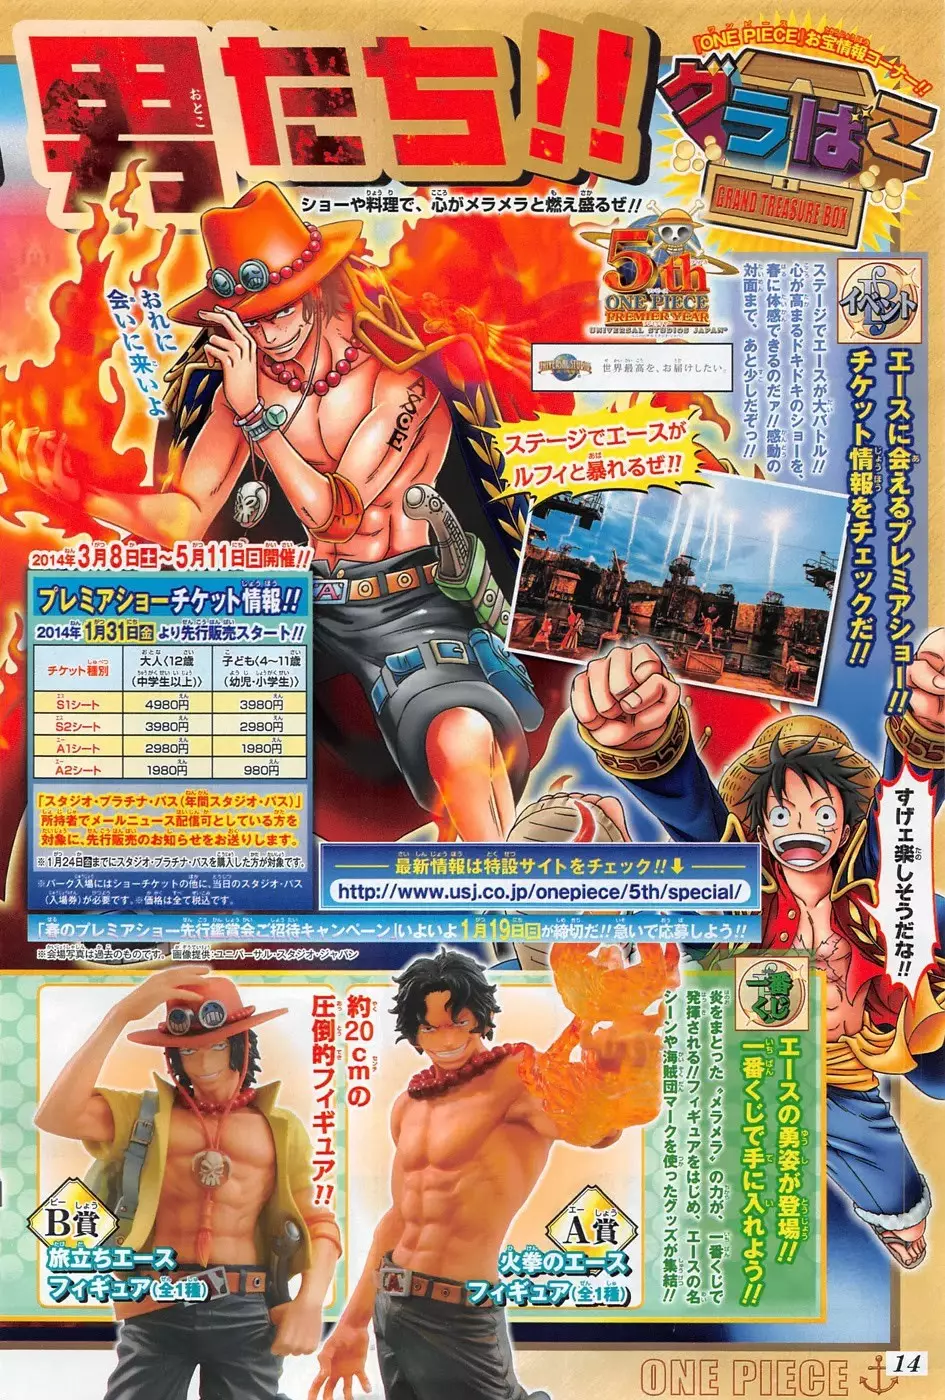 One Piece - 733 page p_00004